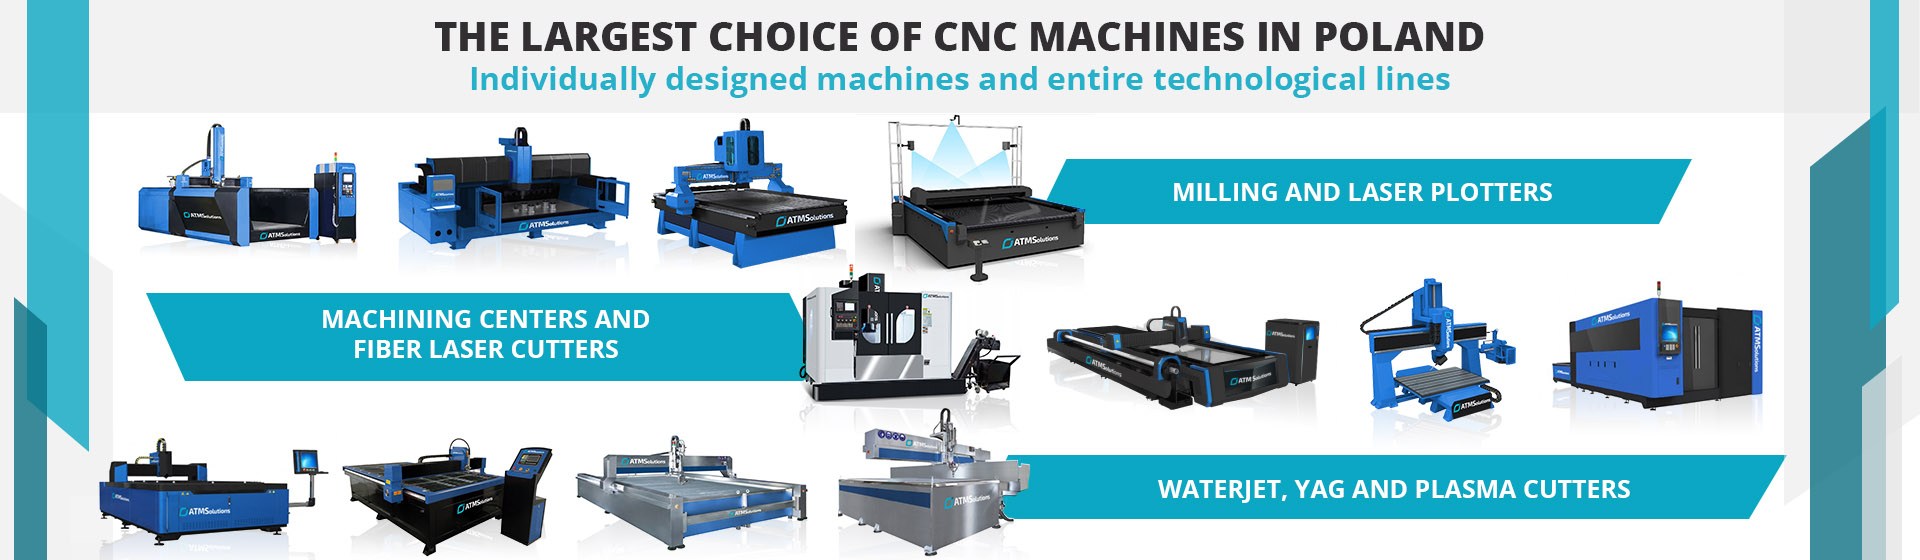 The largest selection of CNC machines in Poland